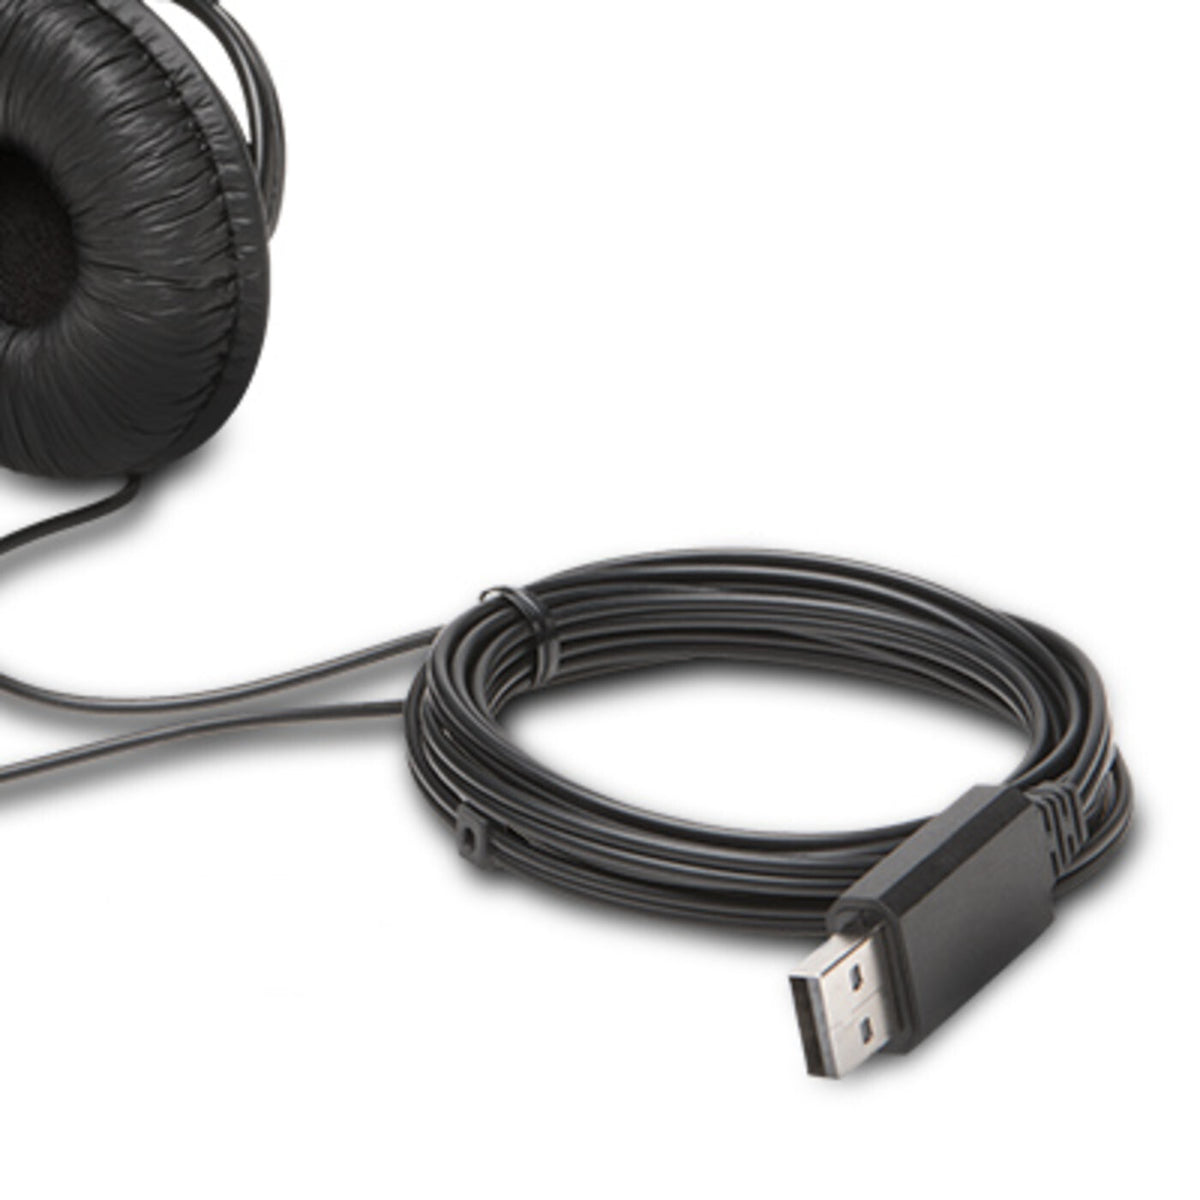 Kensington - Classic USB-A Wired Headset with Microphone